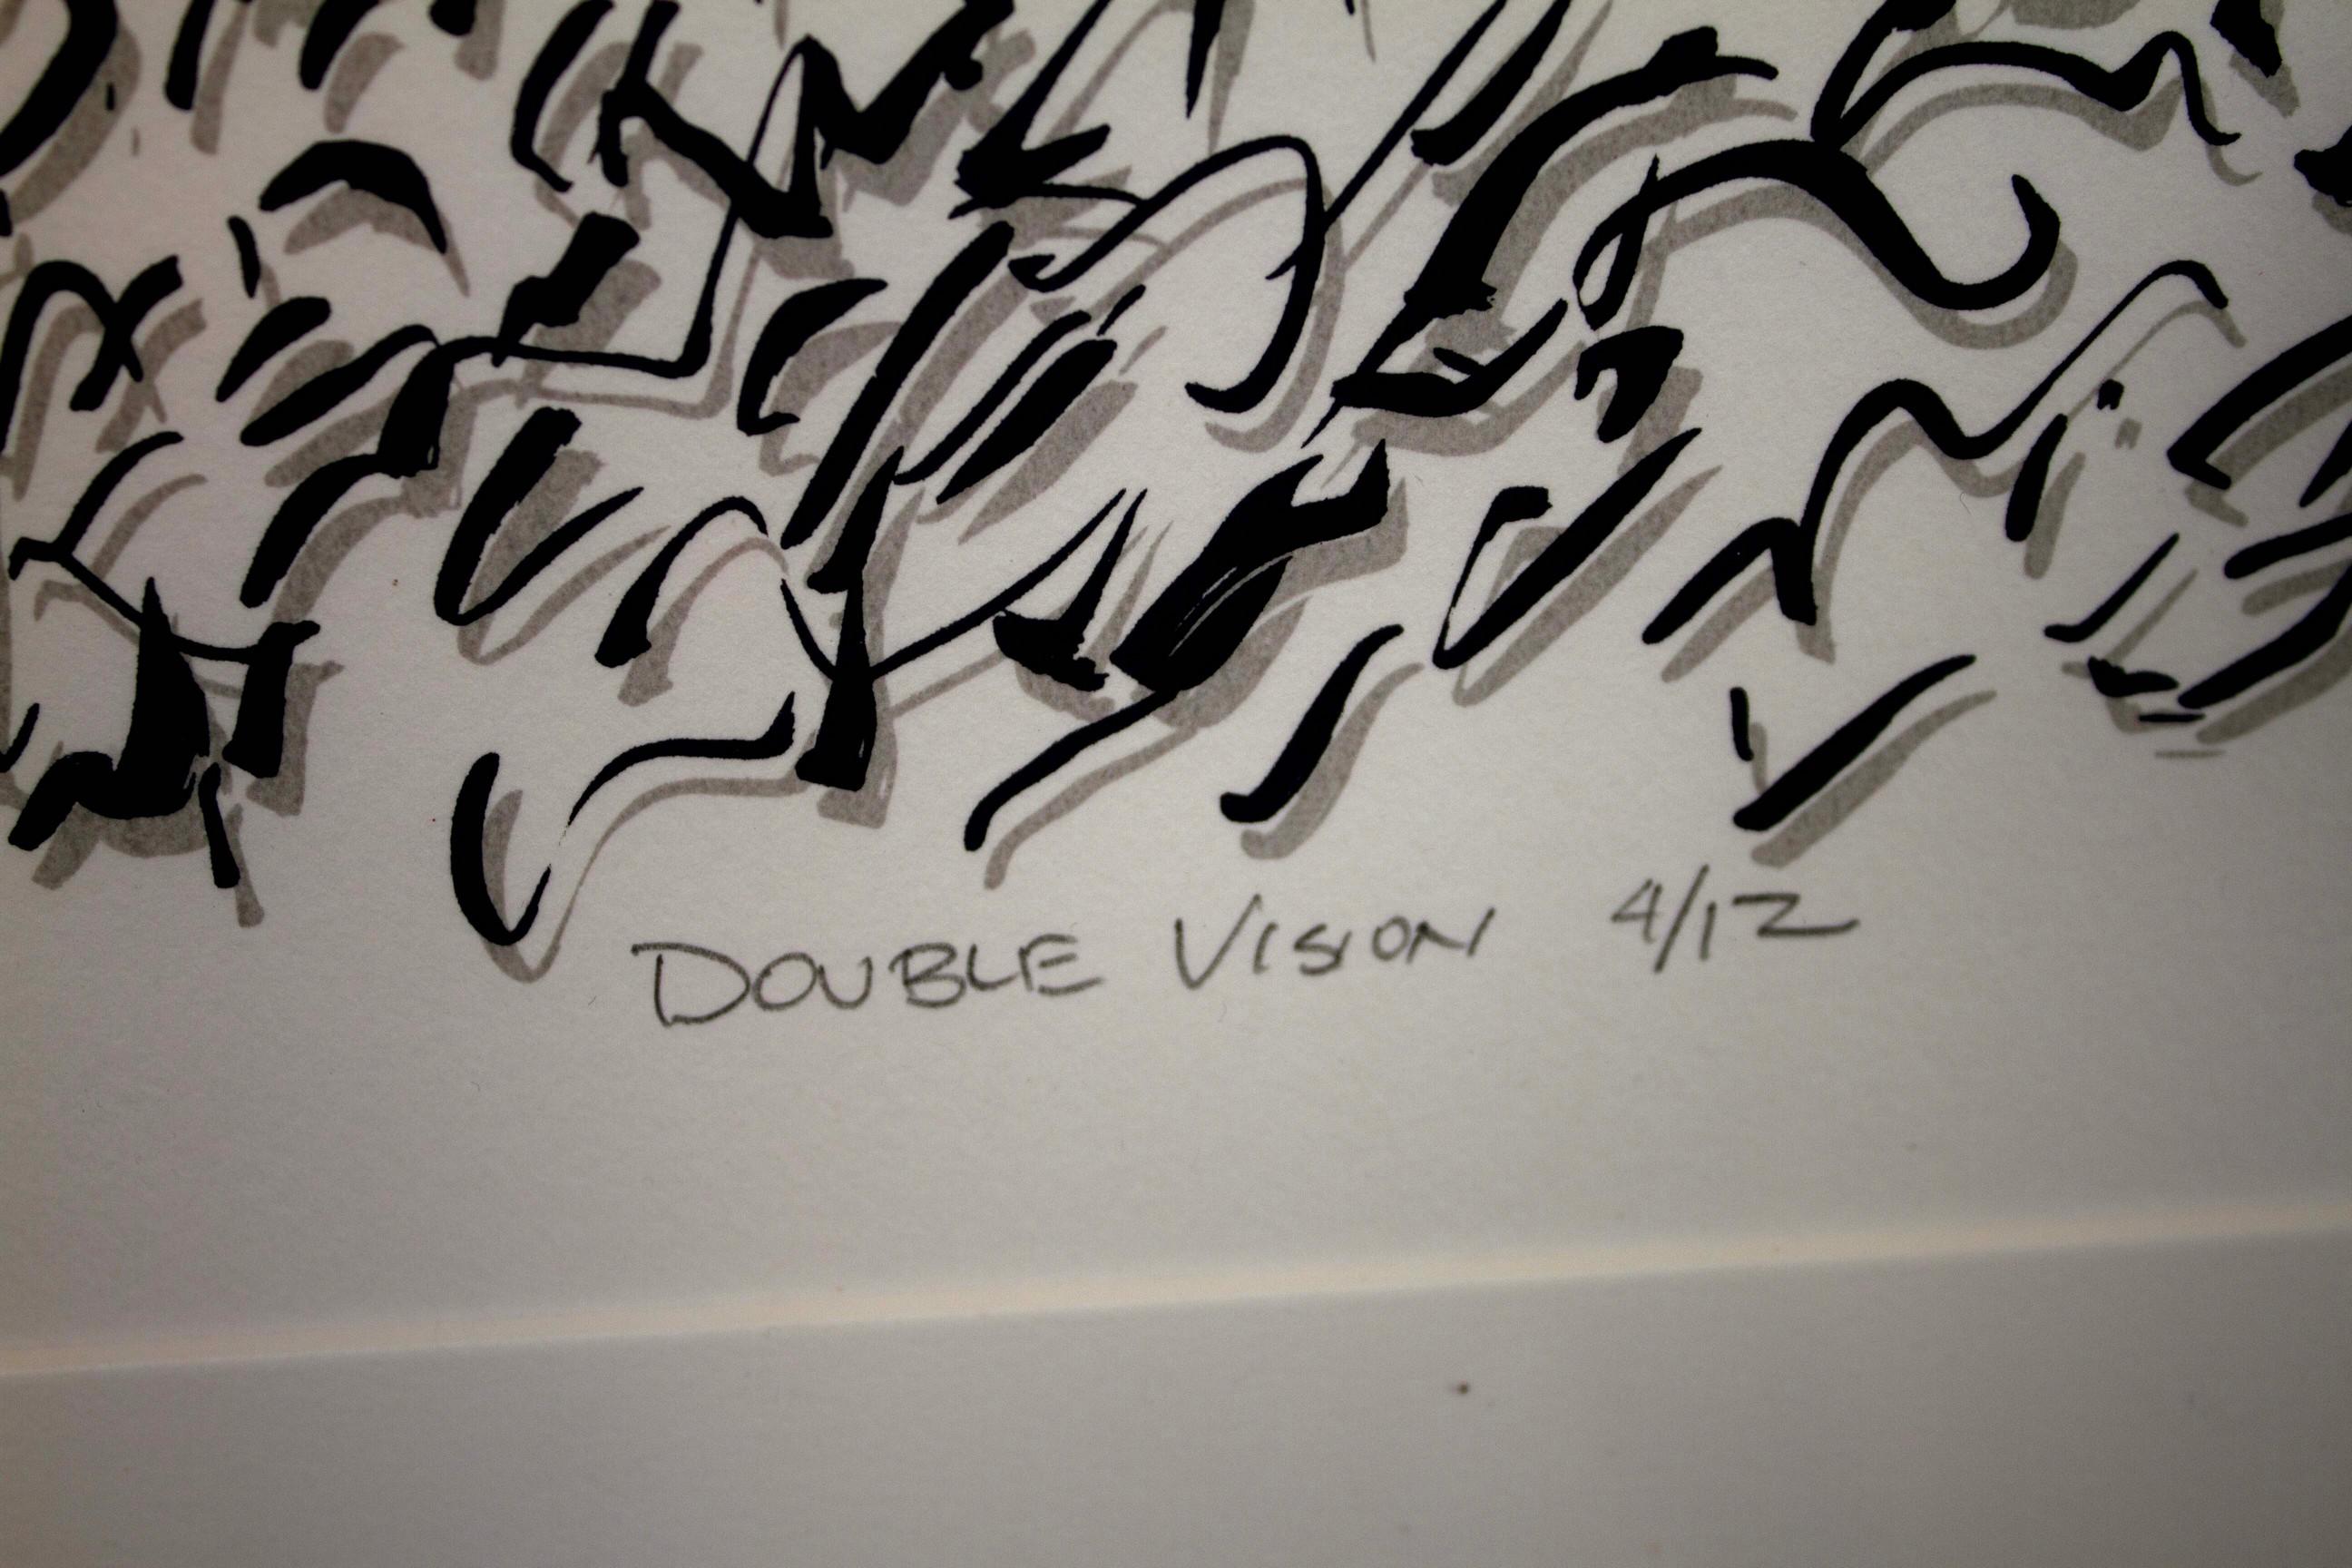 Norm Stewart Double Vision Signed Contemporary 2-C Screenprint 4/21 Framed 1995 1